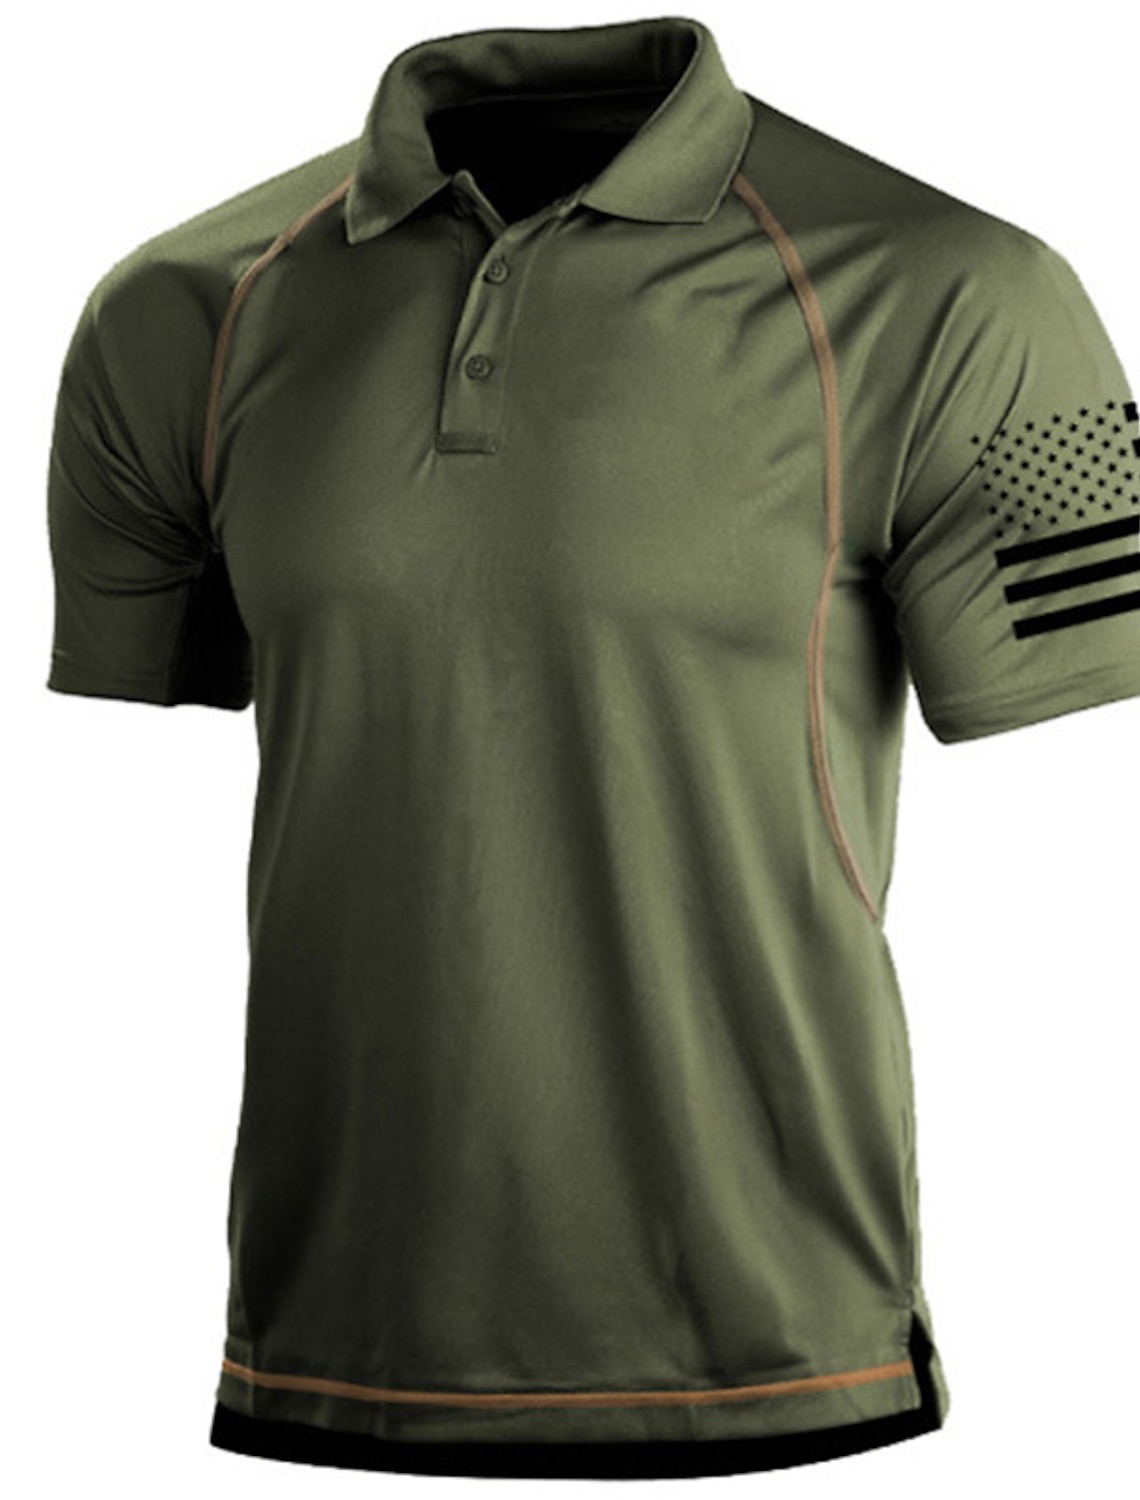 AKARMY Men's Military Short Sleeve T-Shirt Tactical Cargo Pullover Polo Shirts Outdoor Camo Shirt with 1/4 Zipper